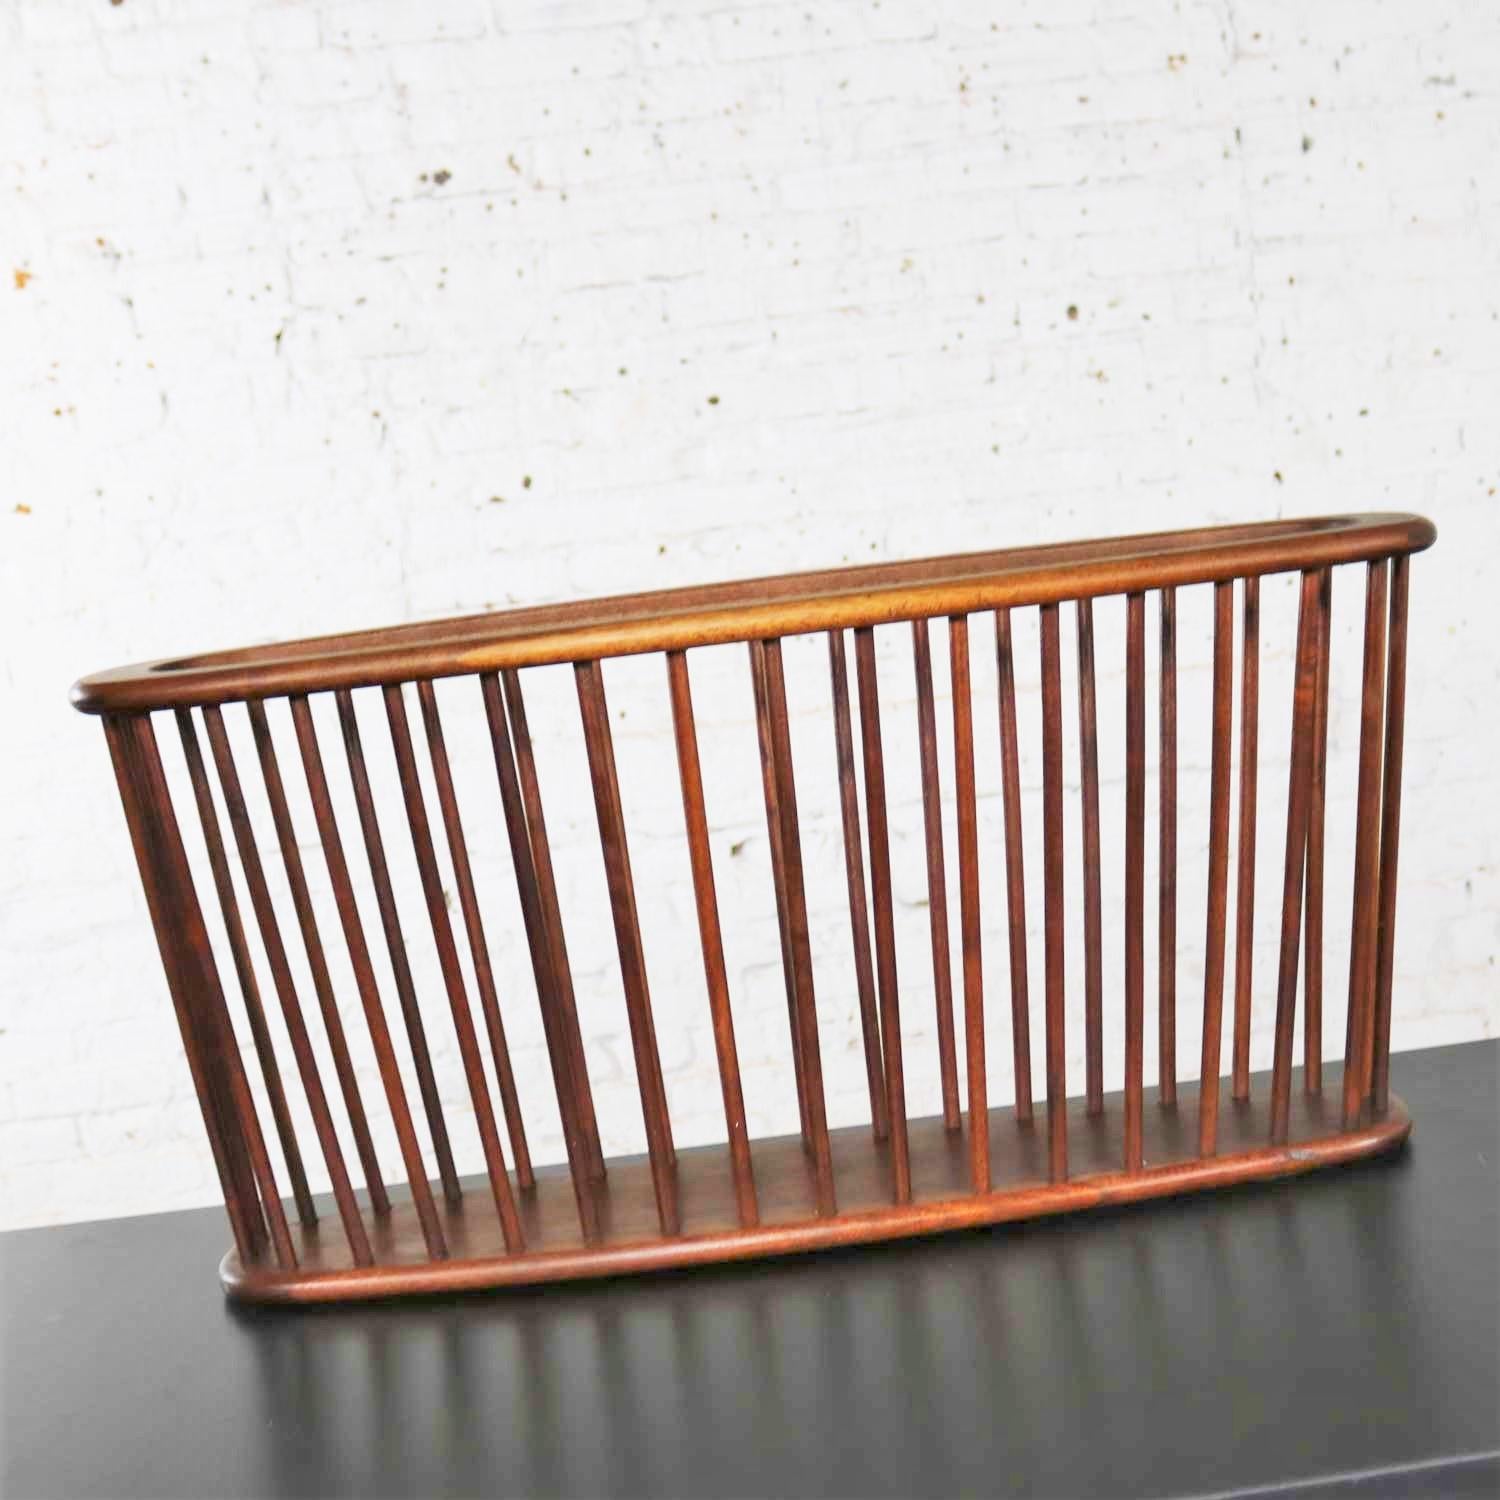 Larger Walnut Oval Magazine Rack Attribute to Arthur Umanoff for Washington Wood In Good Condition For Sale In Topeka, KS